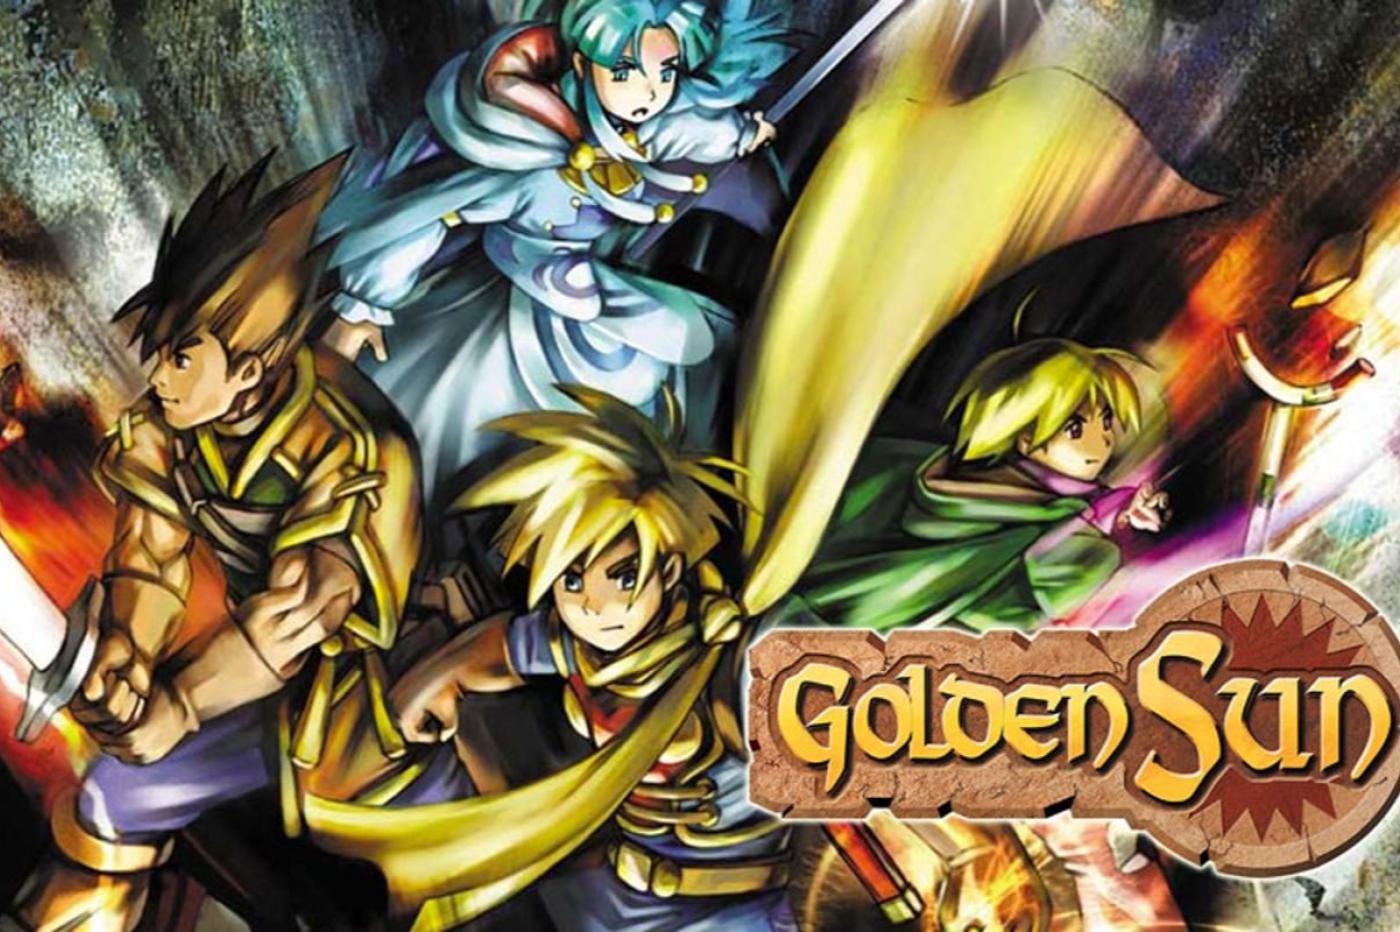 Promotional image of Golden Sun showing 4 protagonists